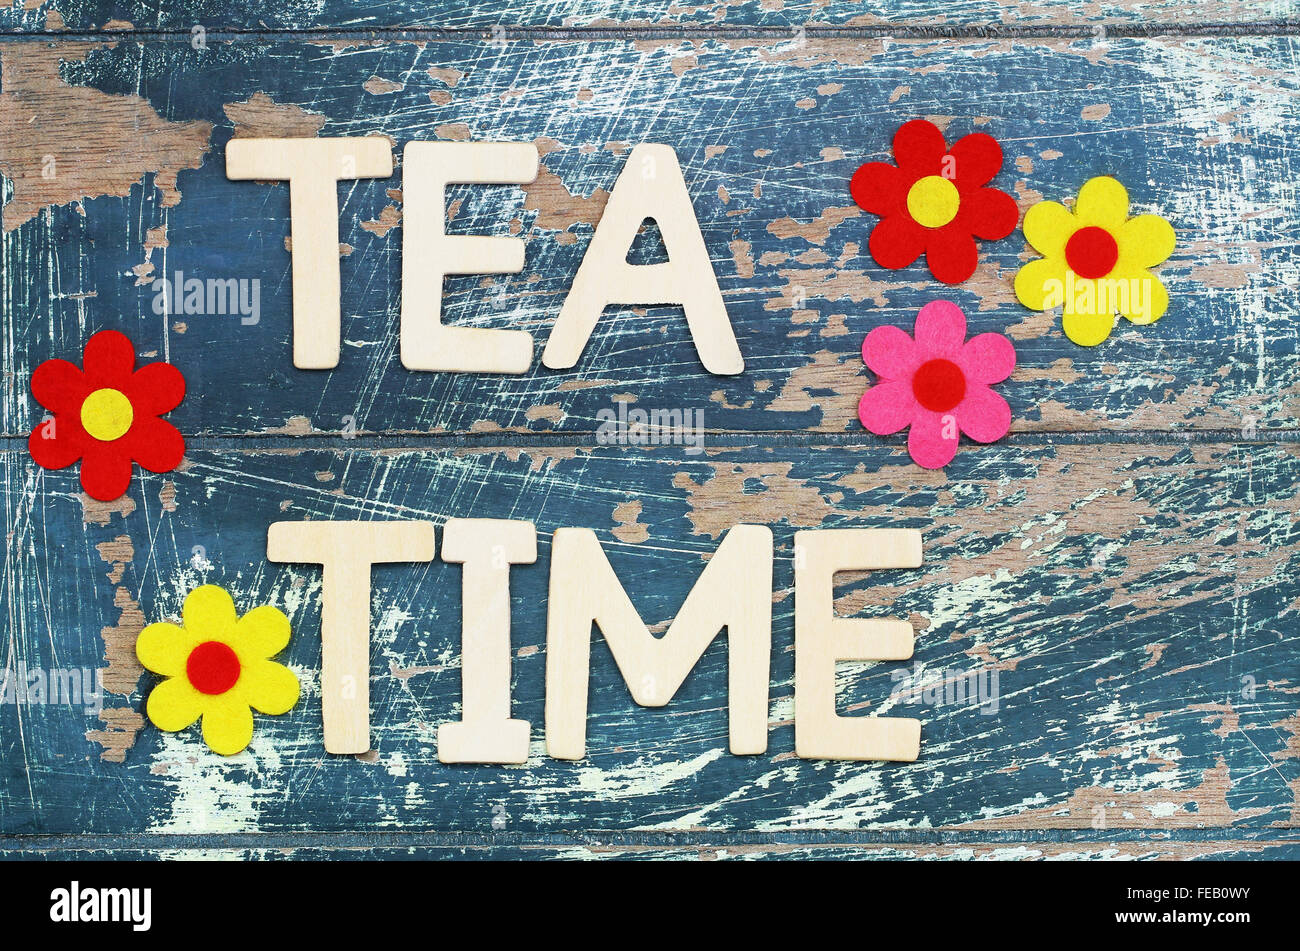 Tea time written with wooden letters on rustic surface and colorful flowers Stock Photo